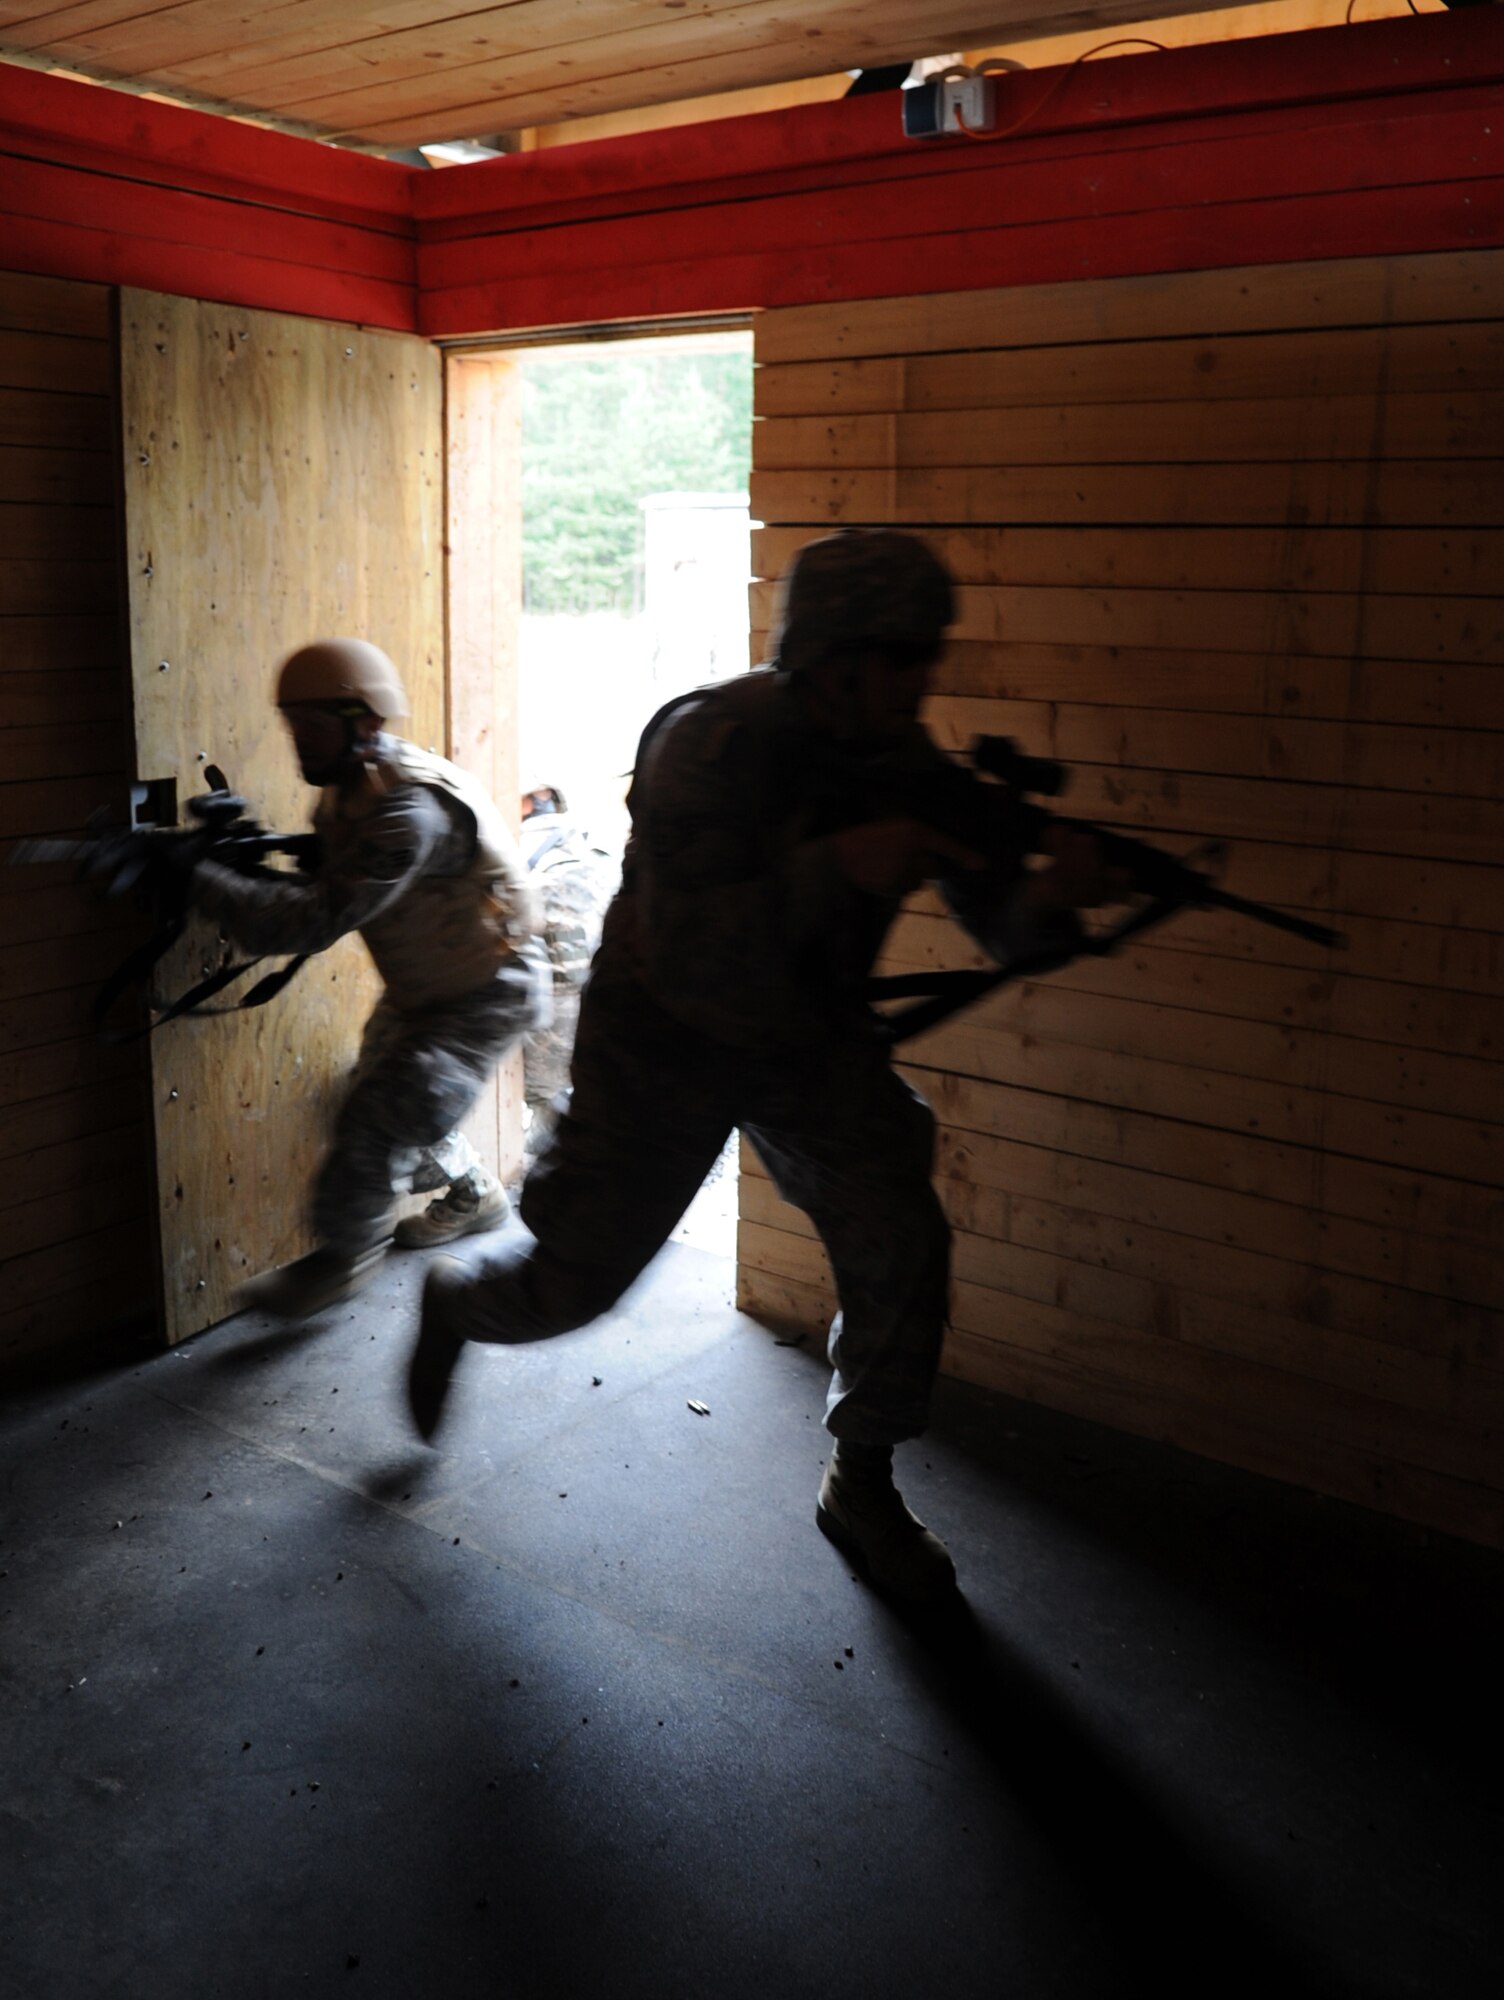 U.S. Air Force Airmen participate in an urban close combat training scenerio, clear a building during exercise ALLIED STRIKE 10, Grafenwoehr, Germany, July 26, 2010. AS 10 is Europe's premier close air support (CAS) exercise, held annually to conduct robust, realistic CAS training that helps build partnership capacity among allied North Atlantic Treaty Organization nations and joint services while refining the latest operational CAS tactics. For more ALLIED STRIKE information go to www.usafe.af.mil/alliedstrike.asp. (U.S. Air Force photo by Senior Airman Caleb Pierce)